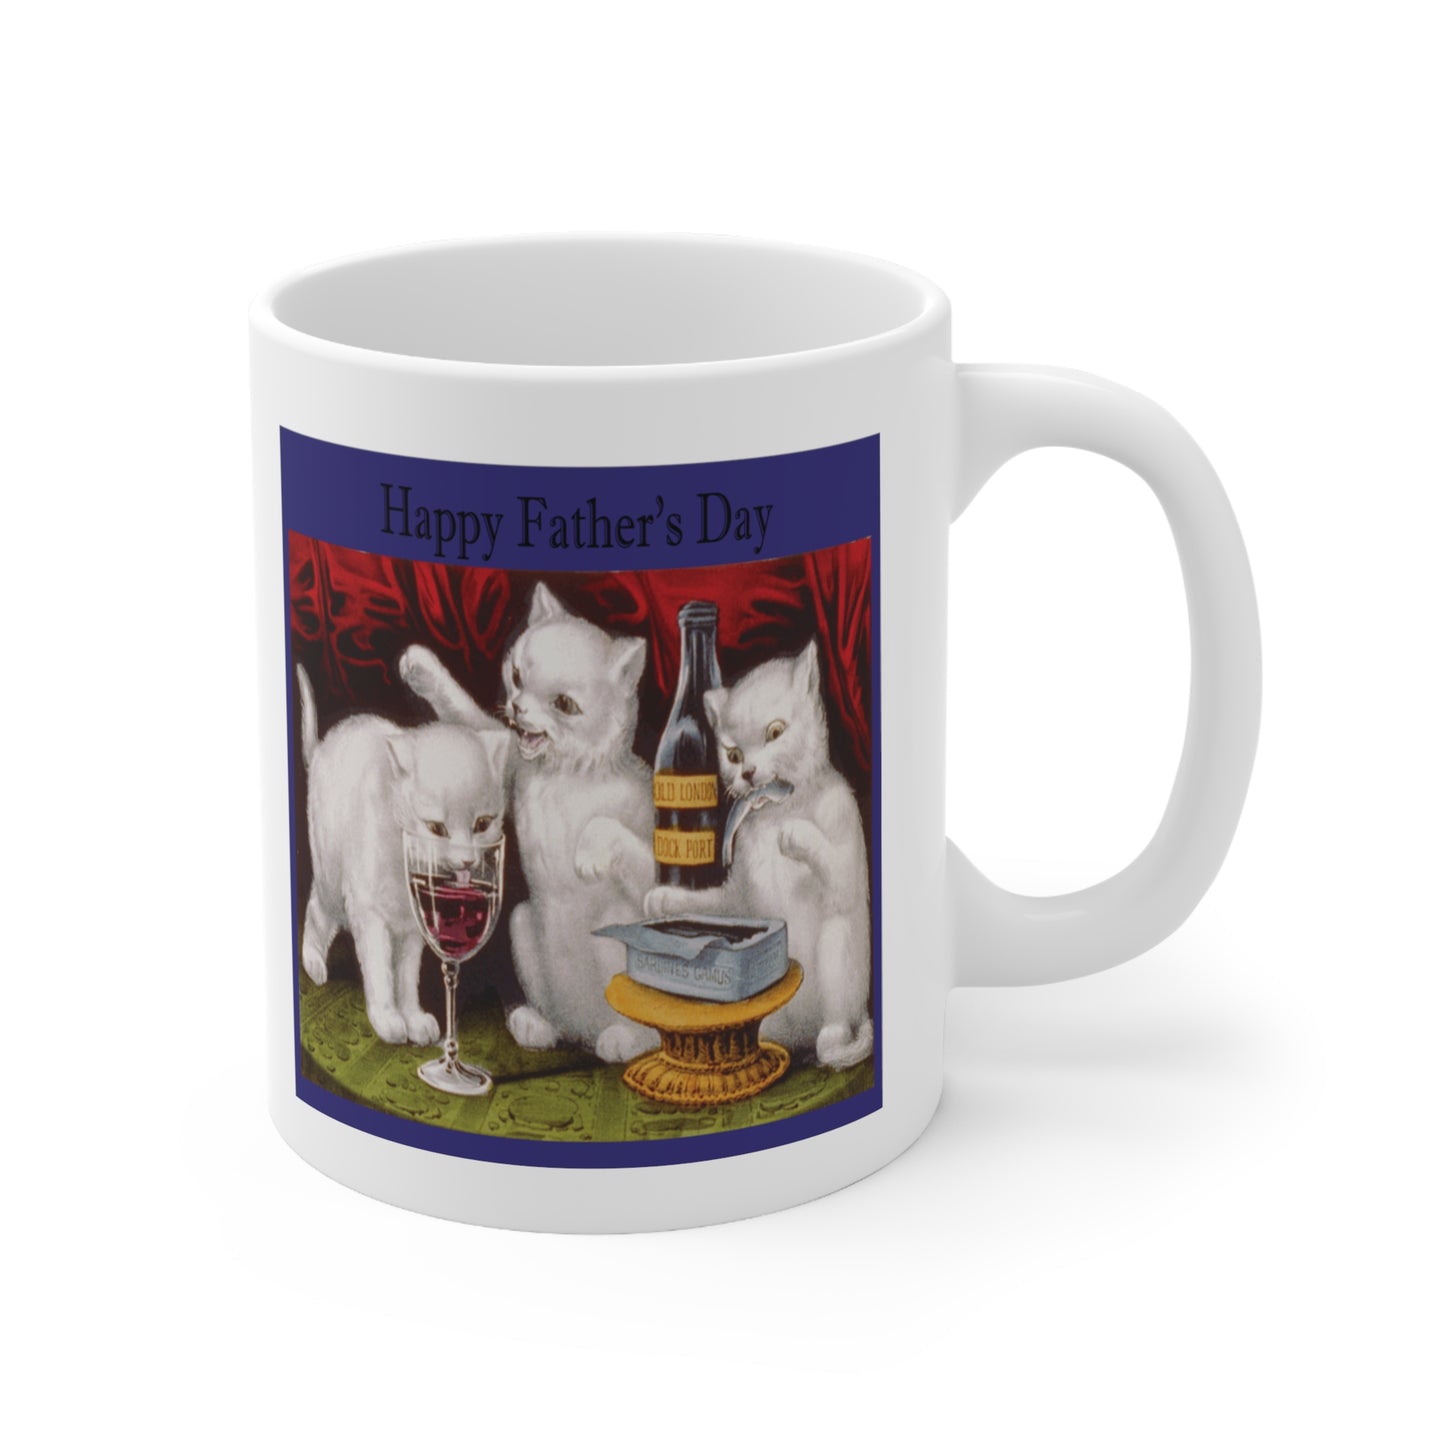 A white ceramic coffee mug with a vintage design of little white cat kittens being naughty with wine and sardines. The greeting reads: Happy Father's Day at the top.